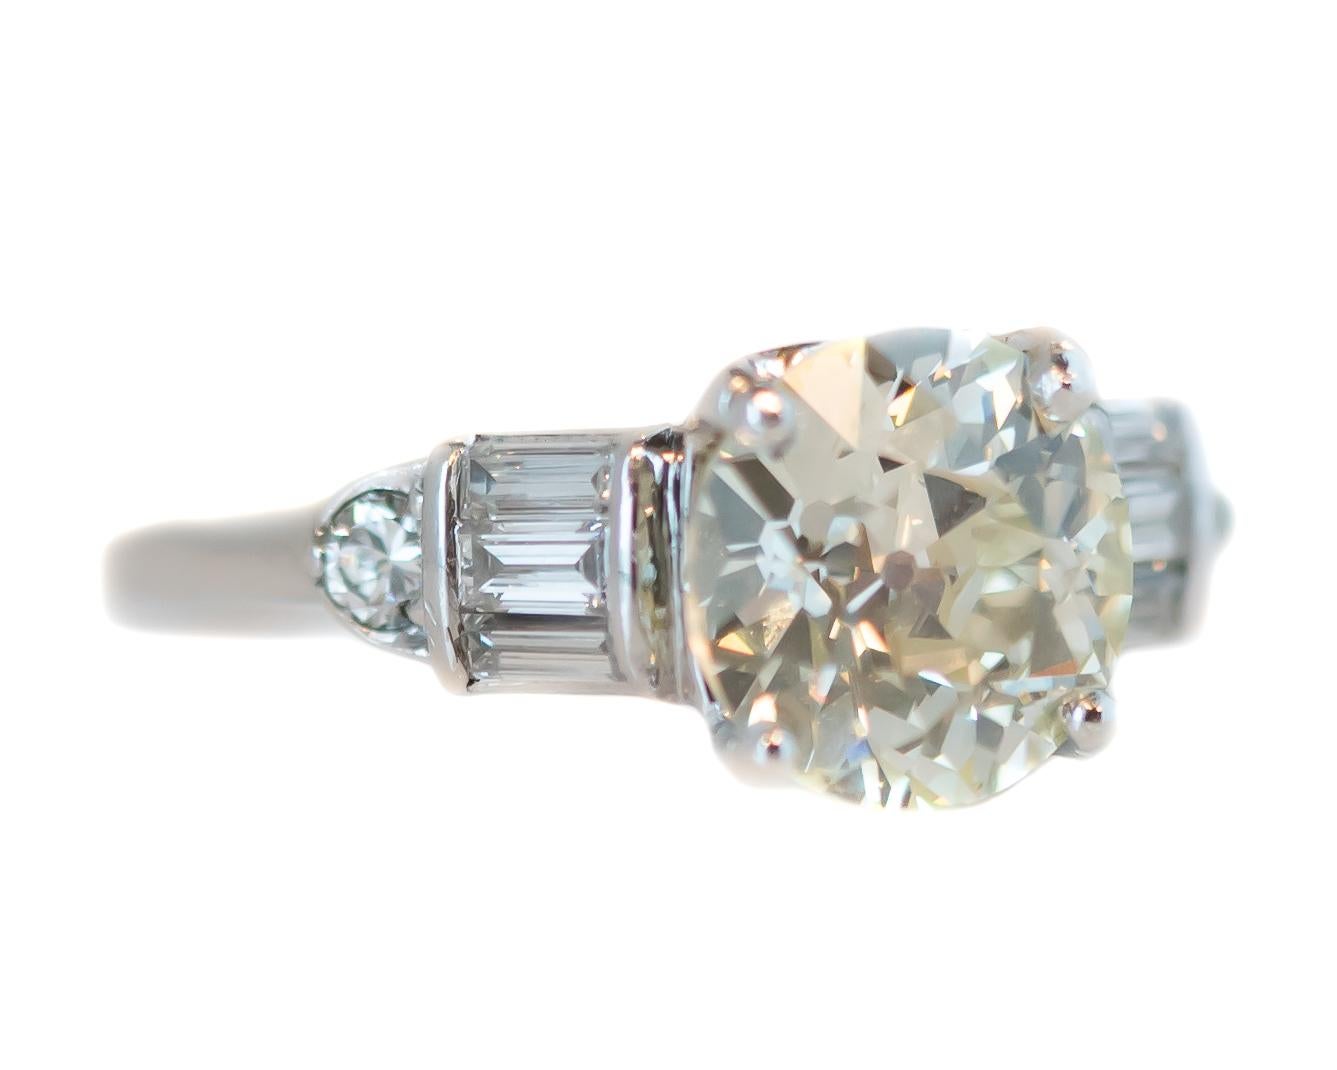 Antique Old European Round Diamond Ring - Platinum, Diamonds

Features:
1915 Old European Round Diamond Center Stone in a 1930s Platinum Setting
2.22 carat Old European Round Diamond
0.20 carat total Old European Round and Baguette Diamond Side